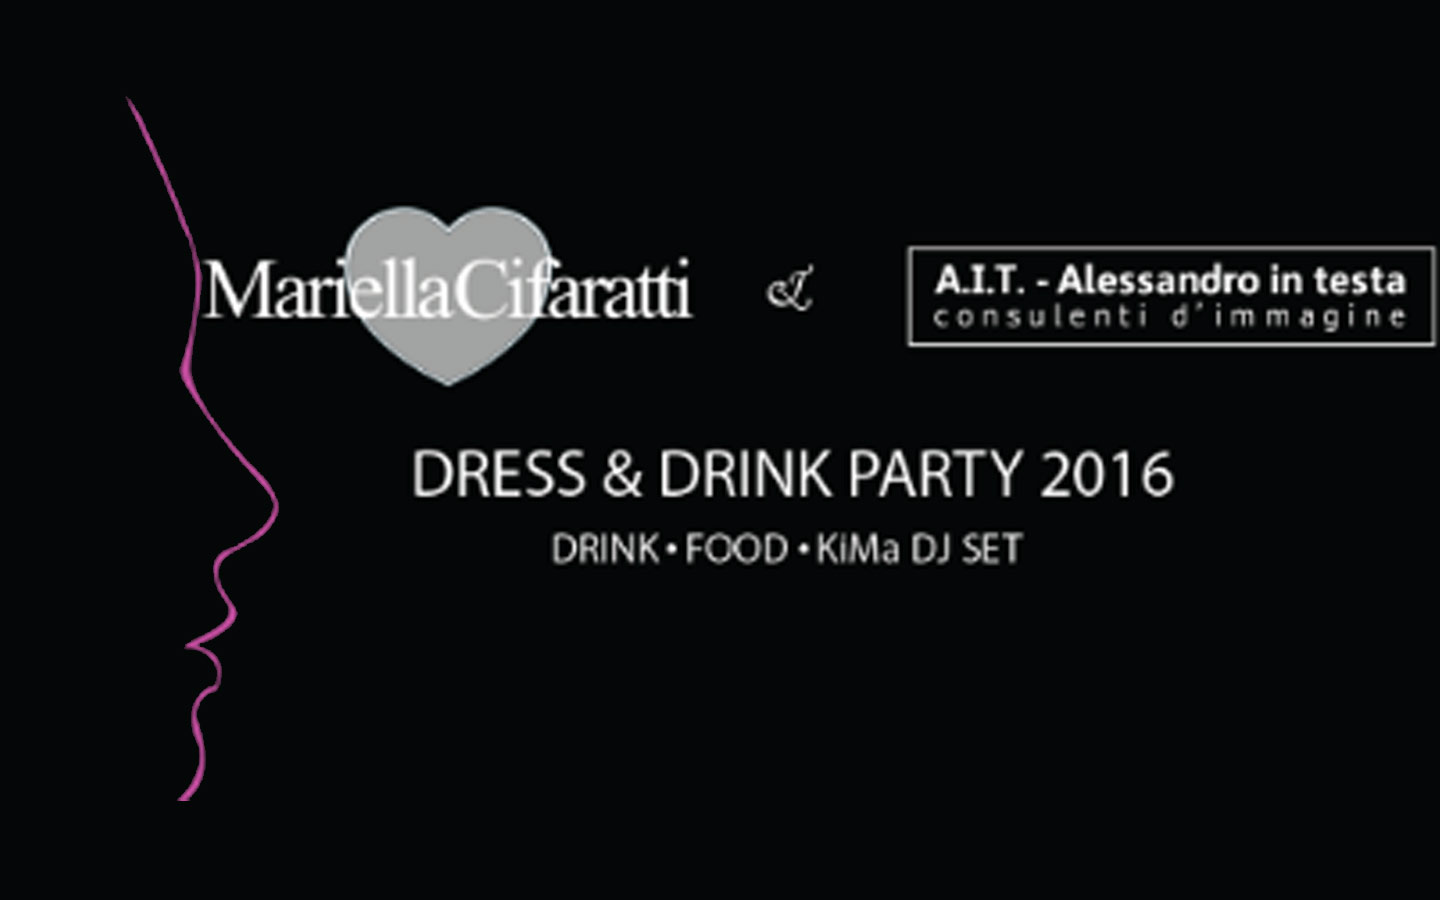 Dress & Drink Party 2016